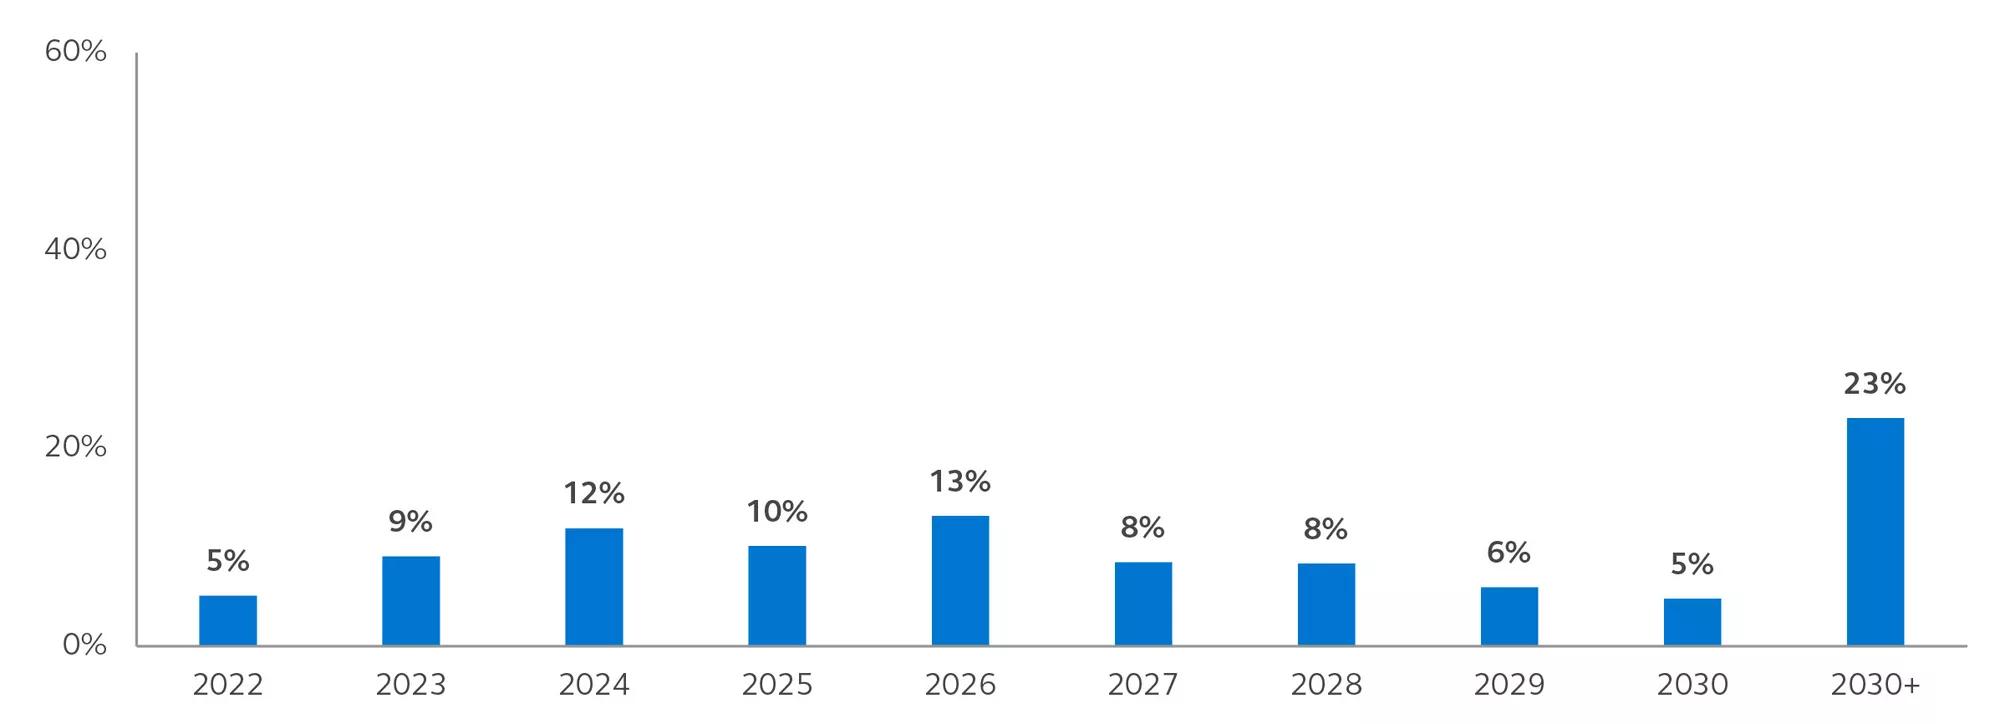 Bar graph of global REITs: % of debt expiring by year from 2022 to 2030+ forecasted